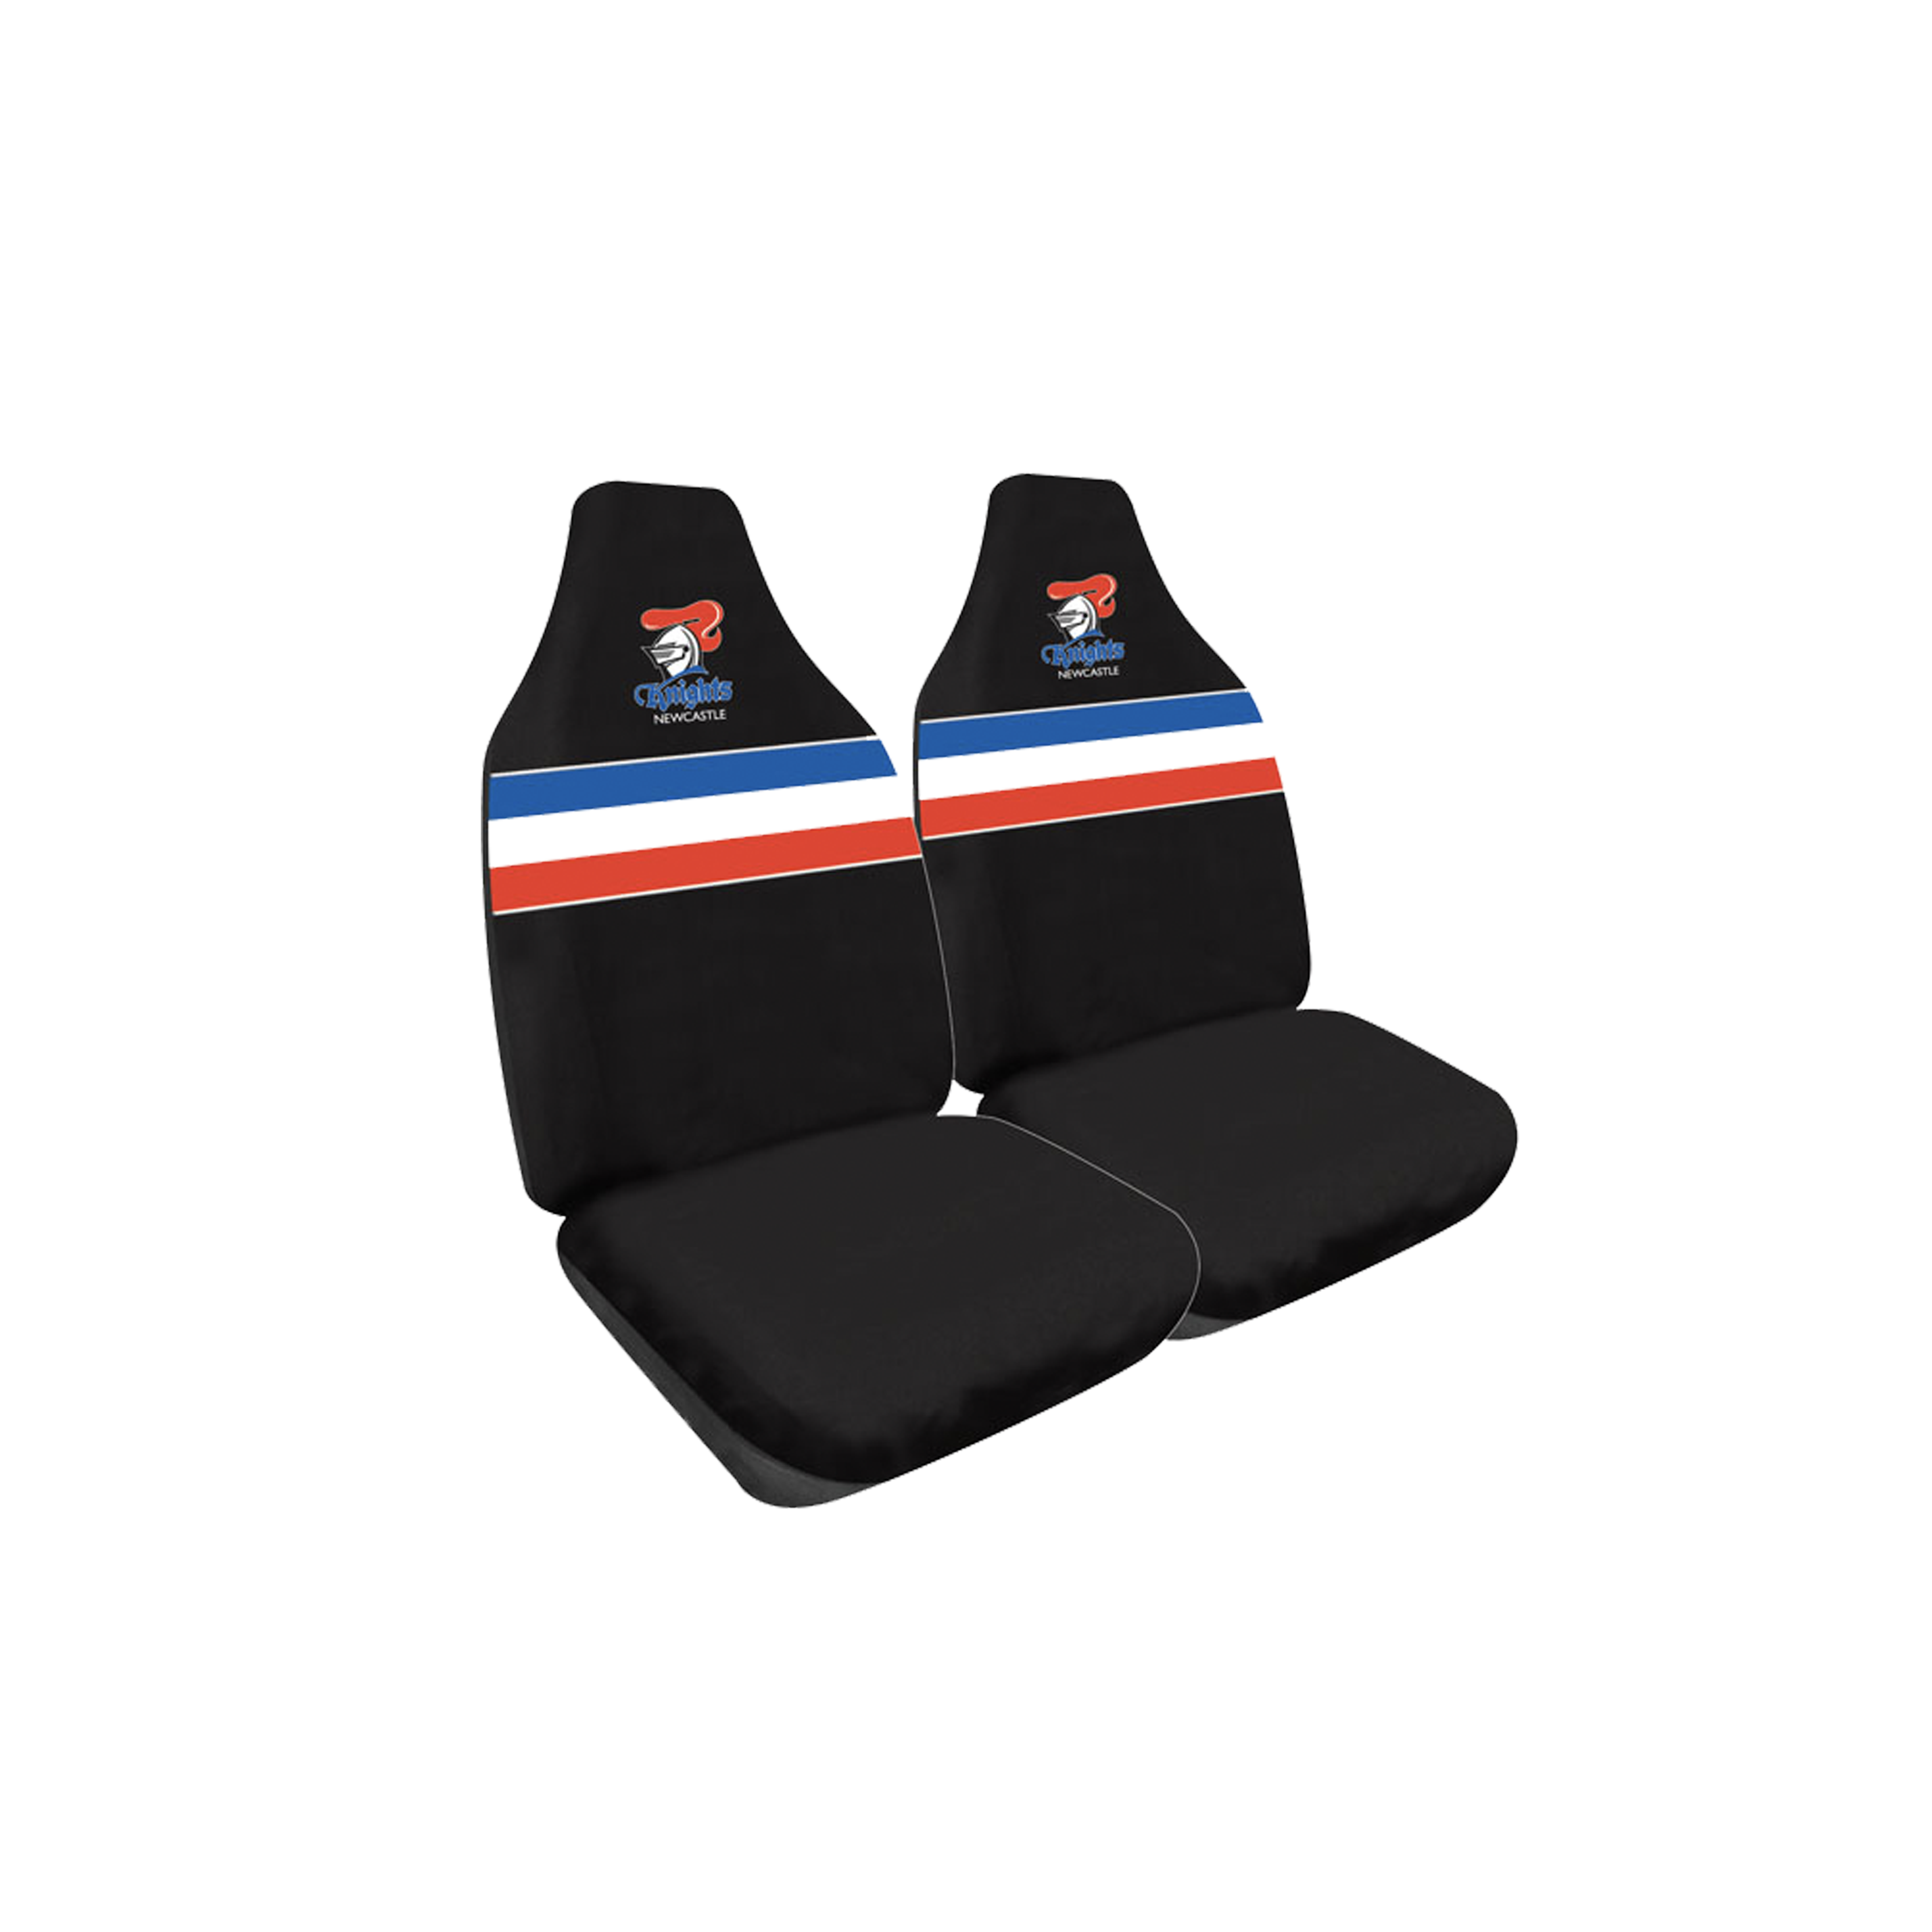 Newcastle Knights Car Seat Covers